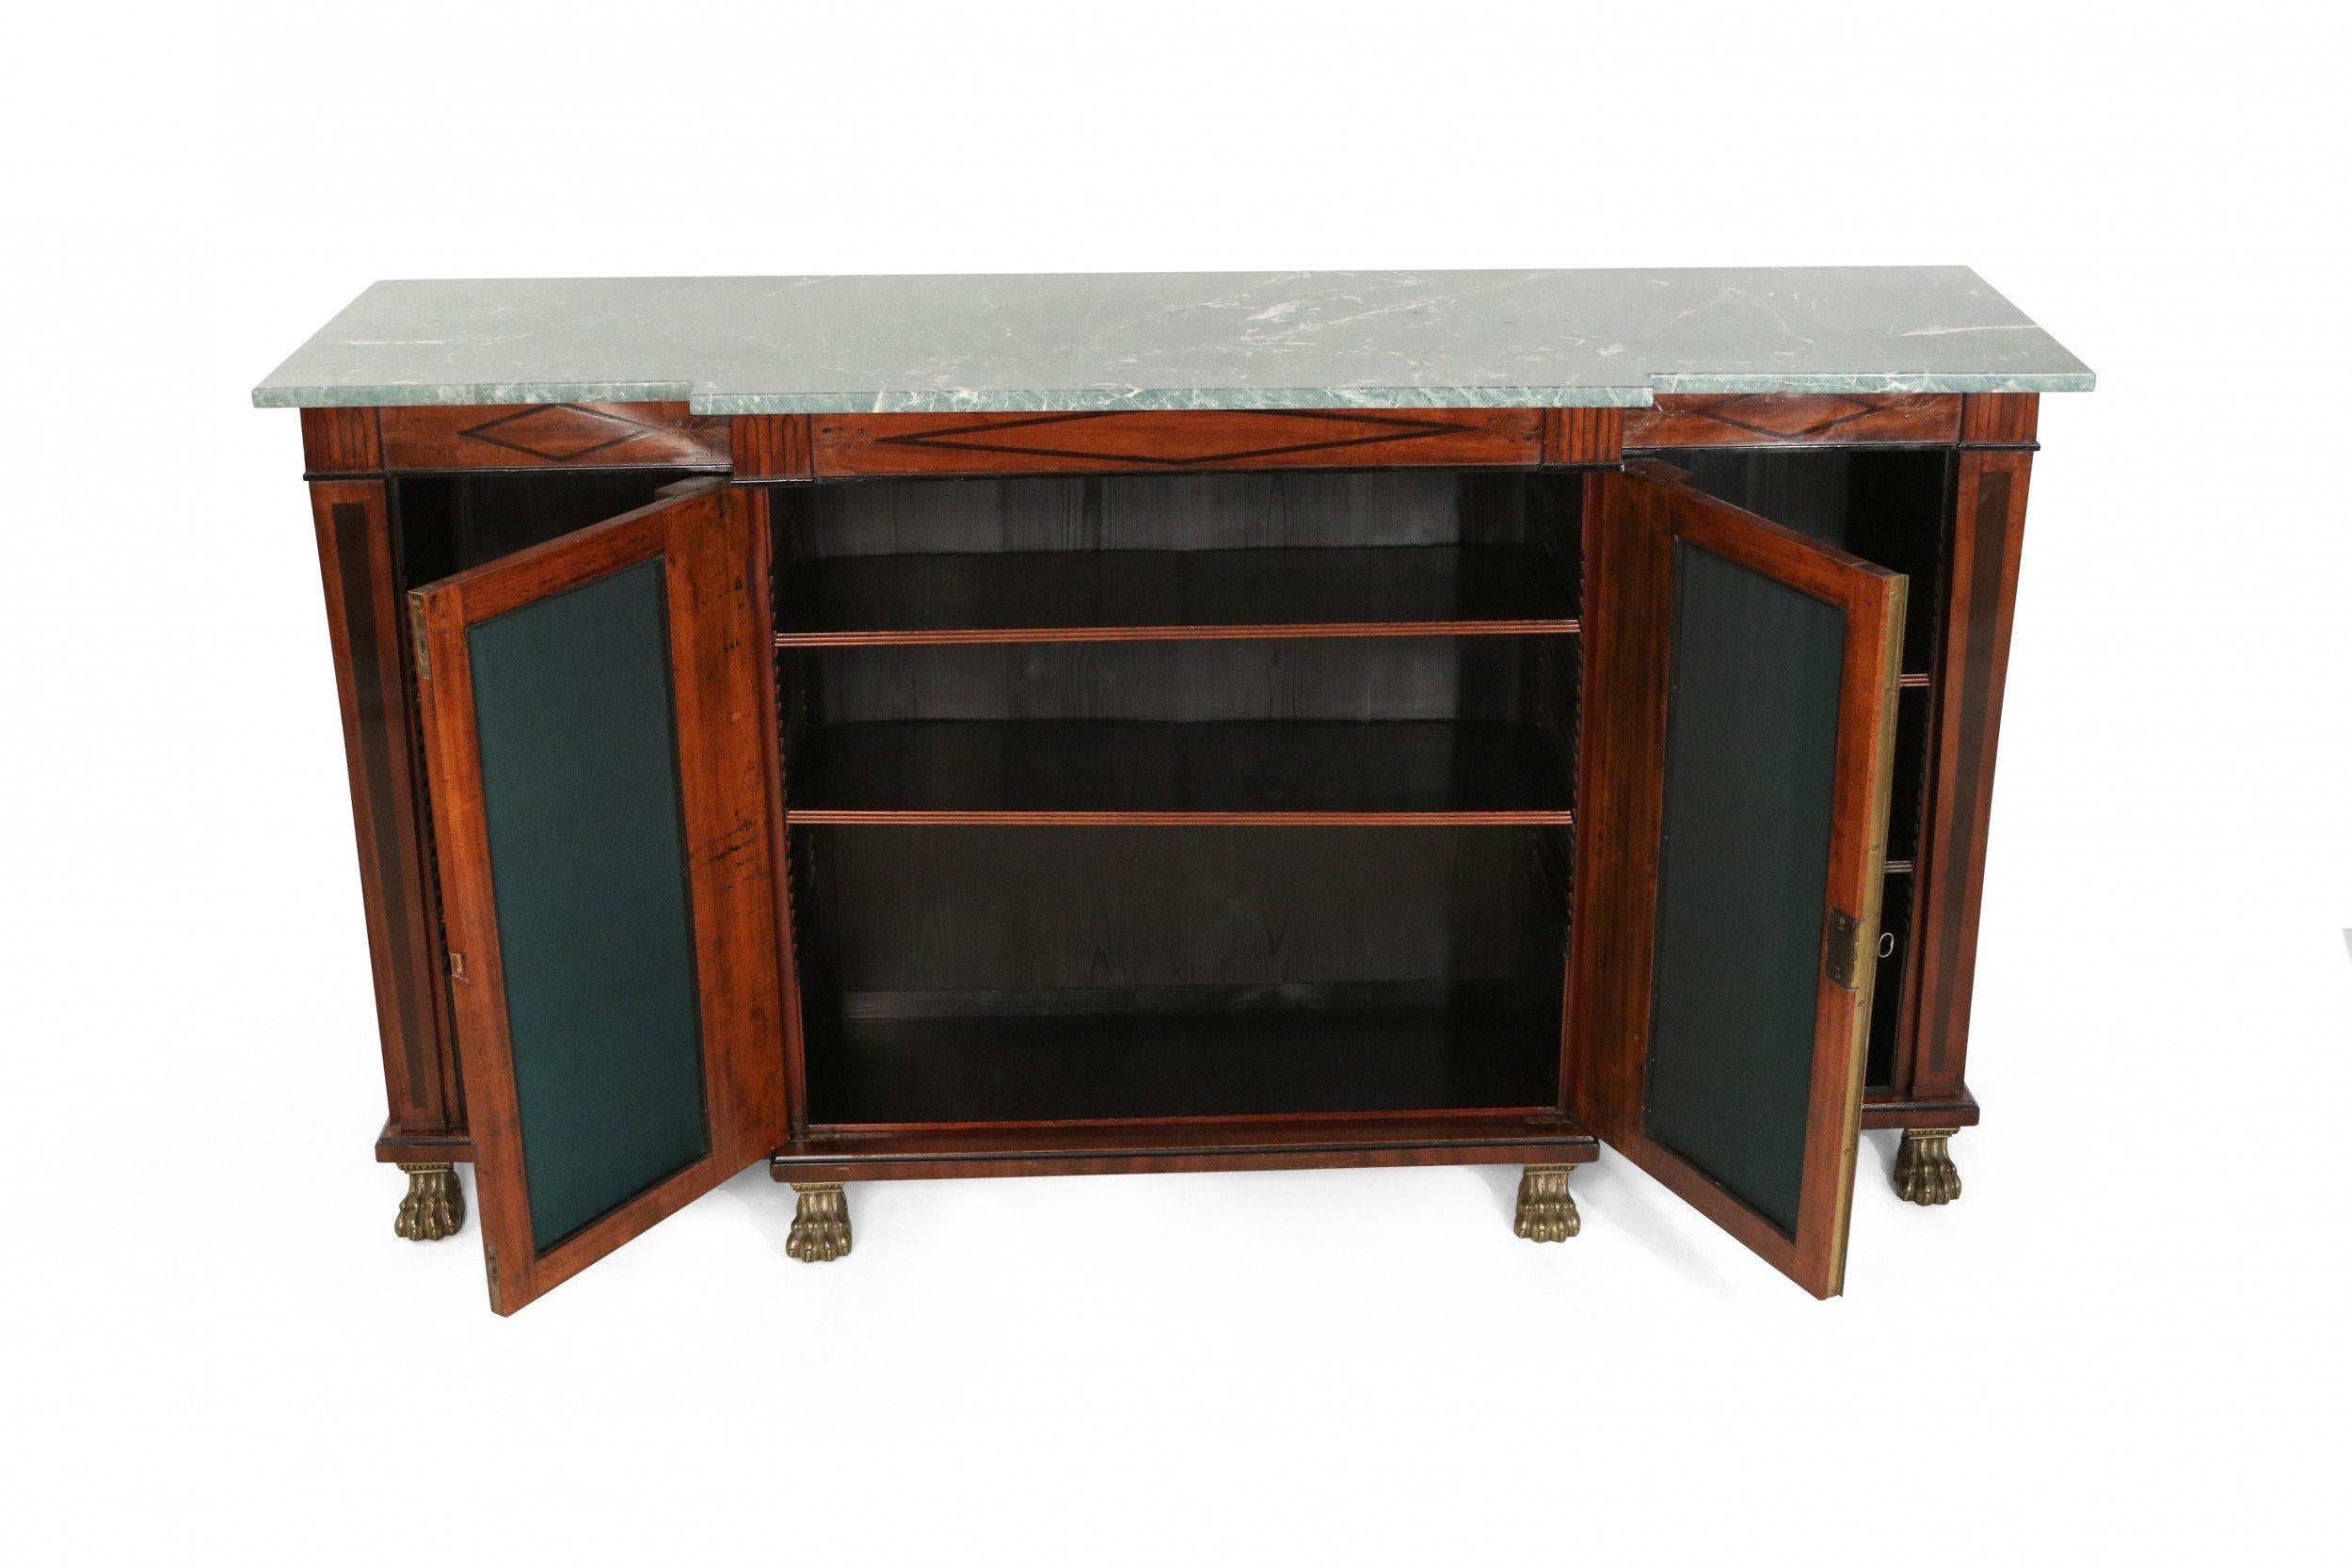 English Regency mahogany & ebonized inlaid triim credenza with open side compartments containing two adjustable shelves and centering doors having a brass diamond screen with green fabric paneled under a green marble top